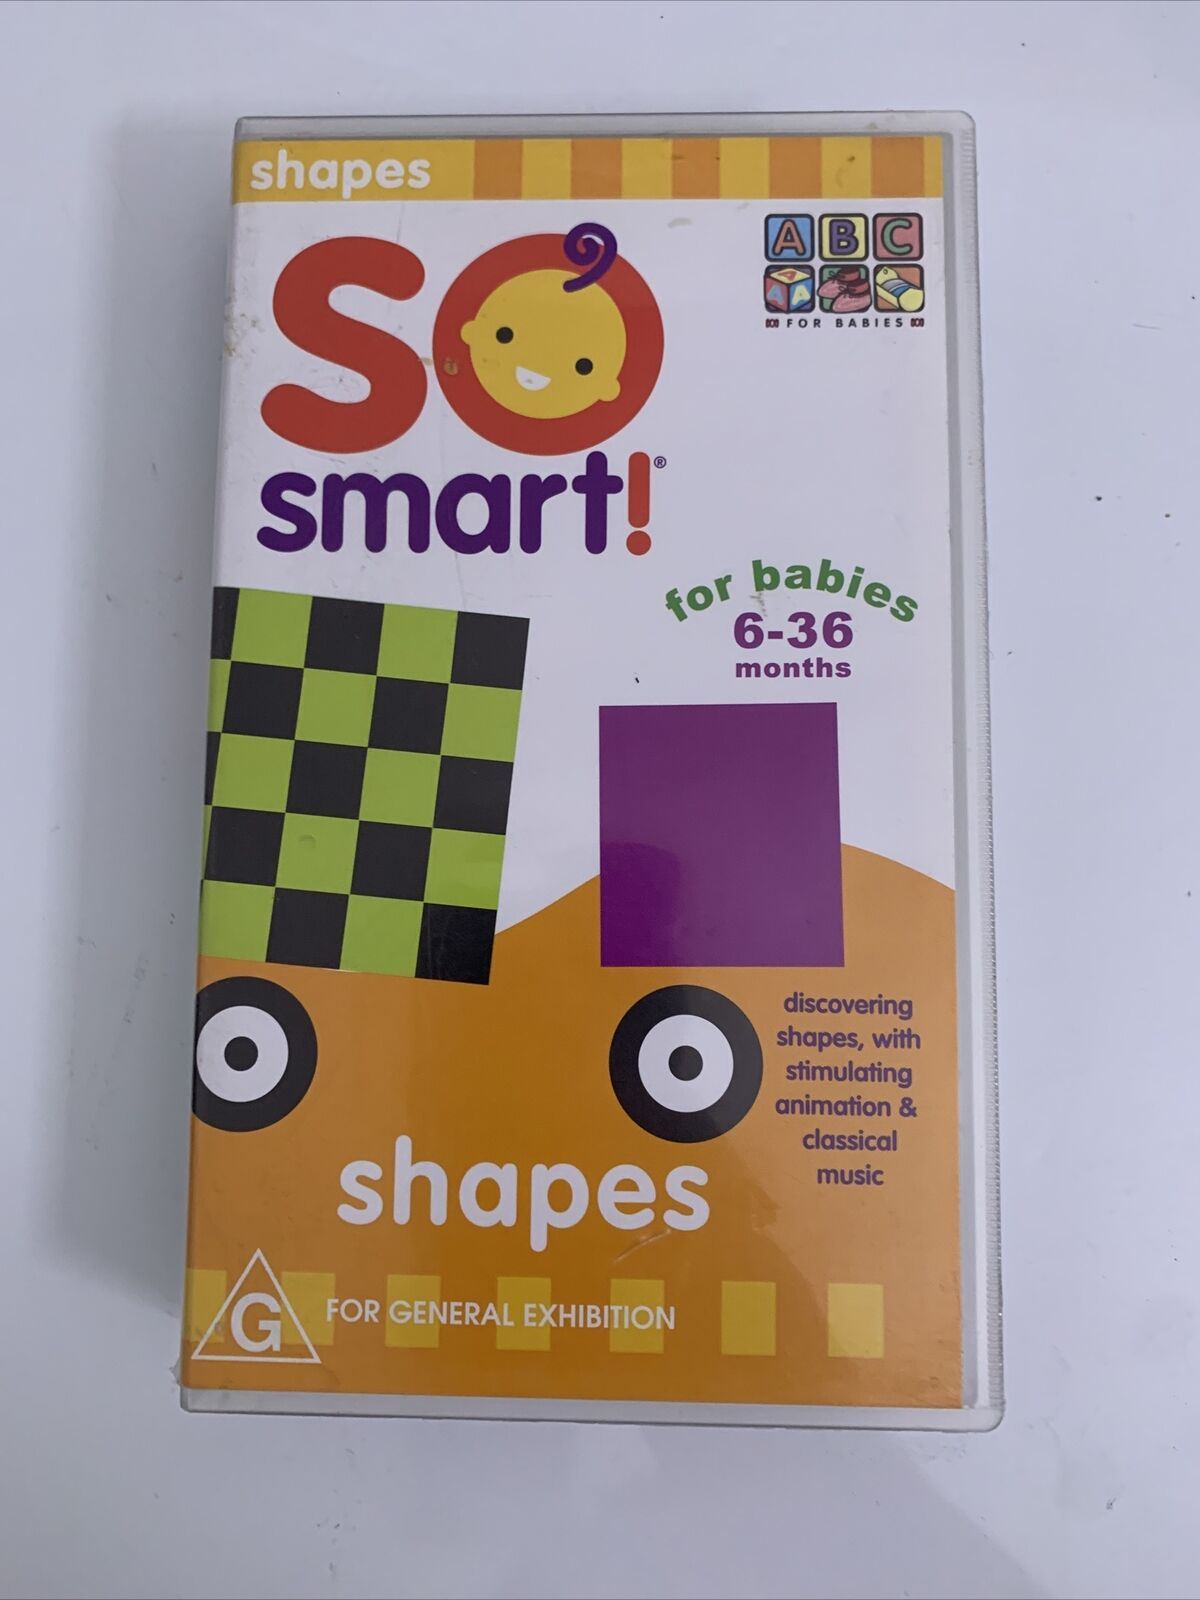 So Smart Shapes for Babies 6-36 months ABC VHS PAL